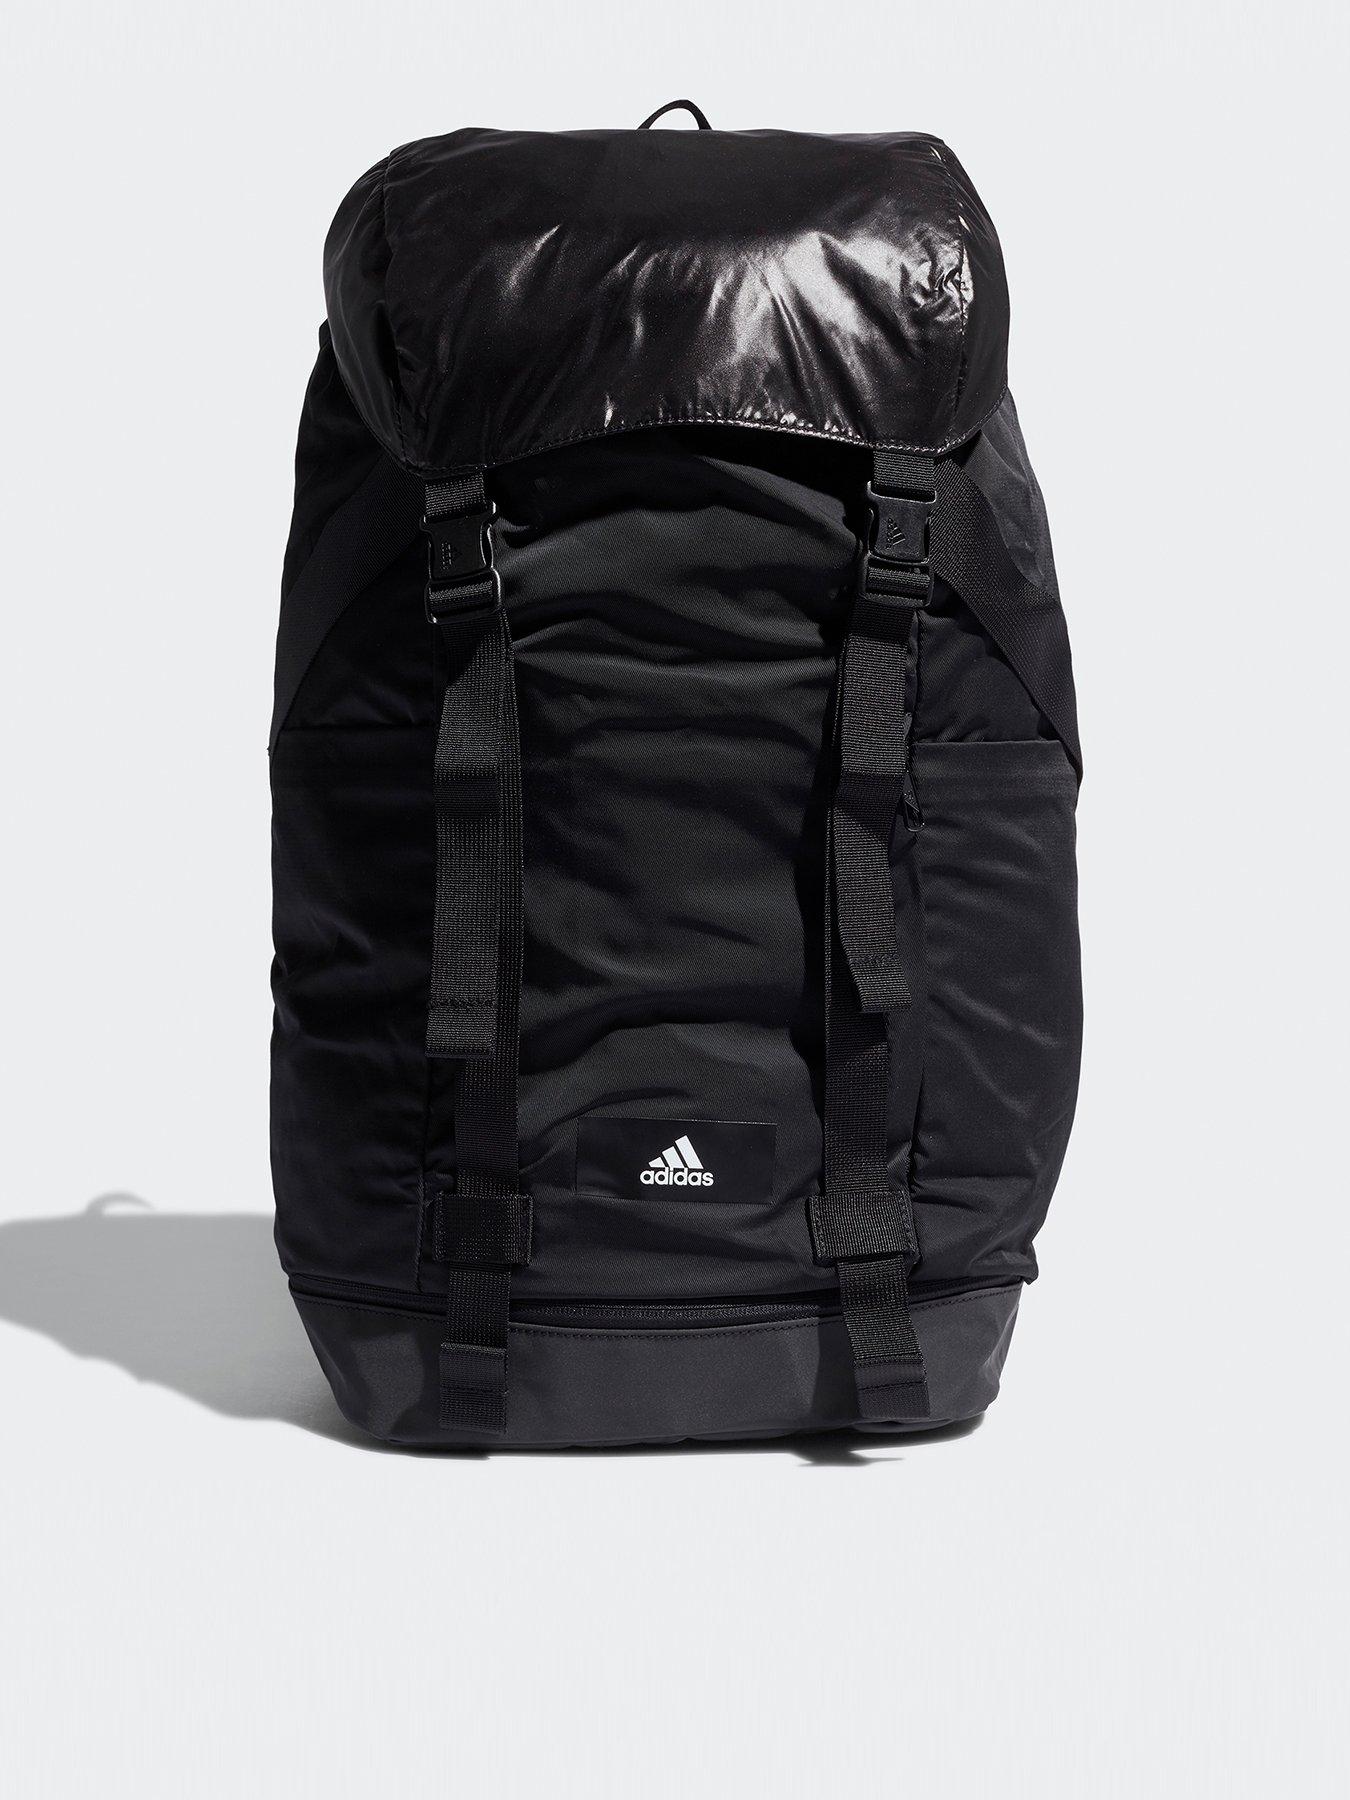 Bags & Purses Sports Functional Backpack